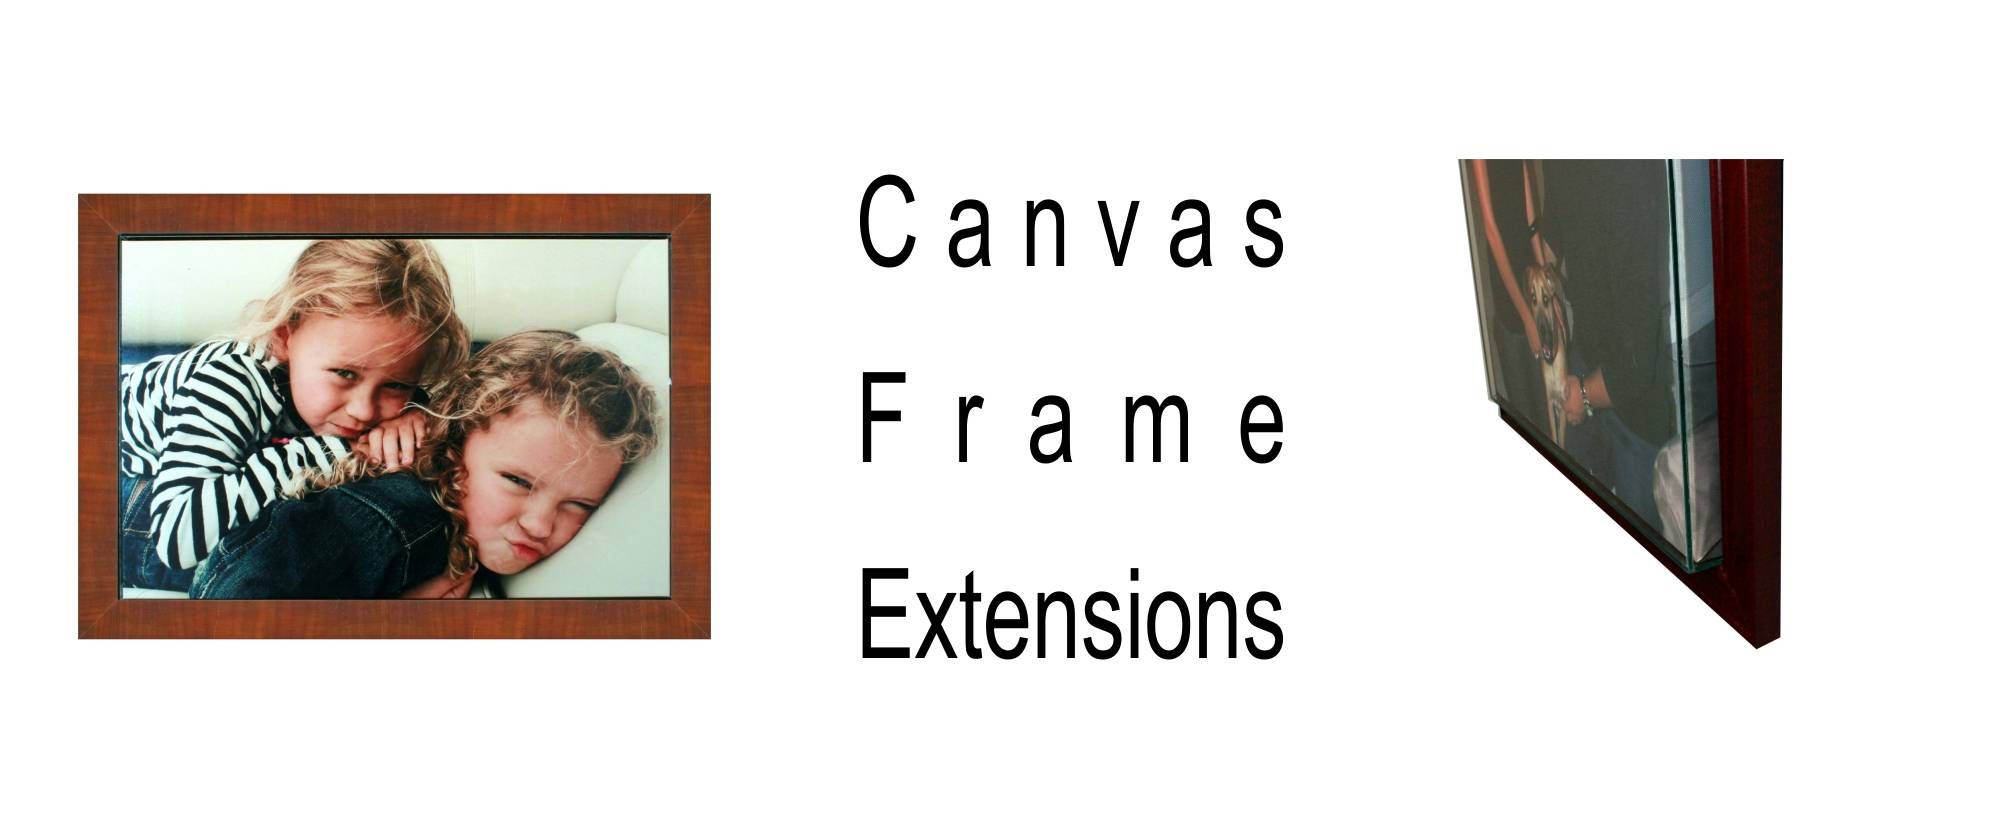 Canvas Frame Extension